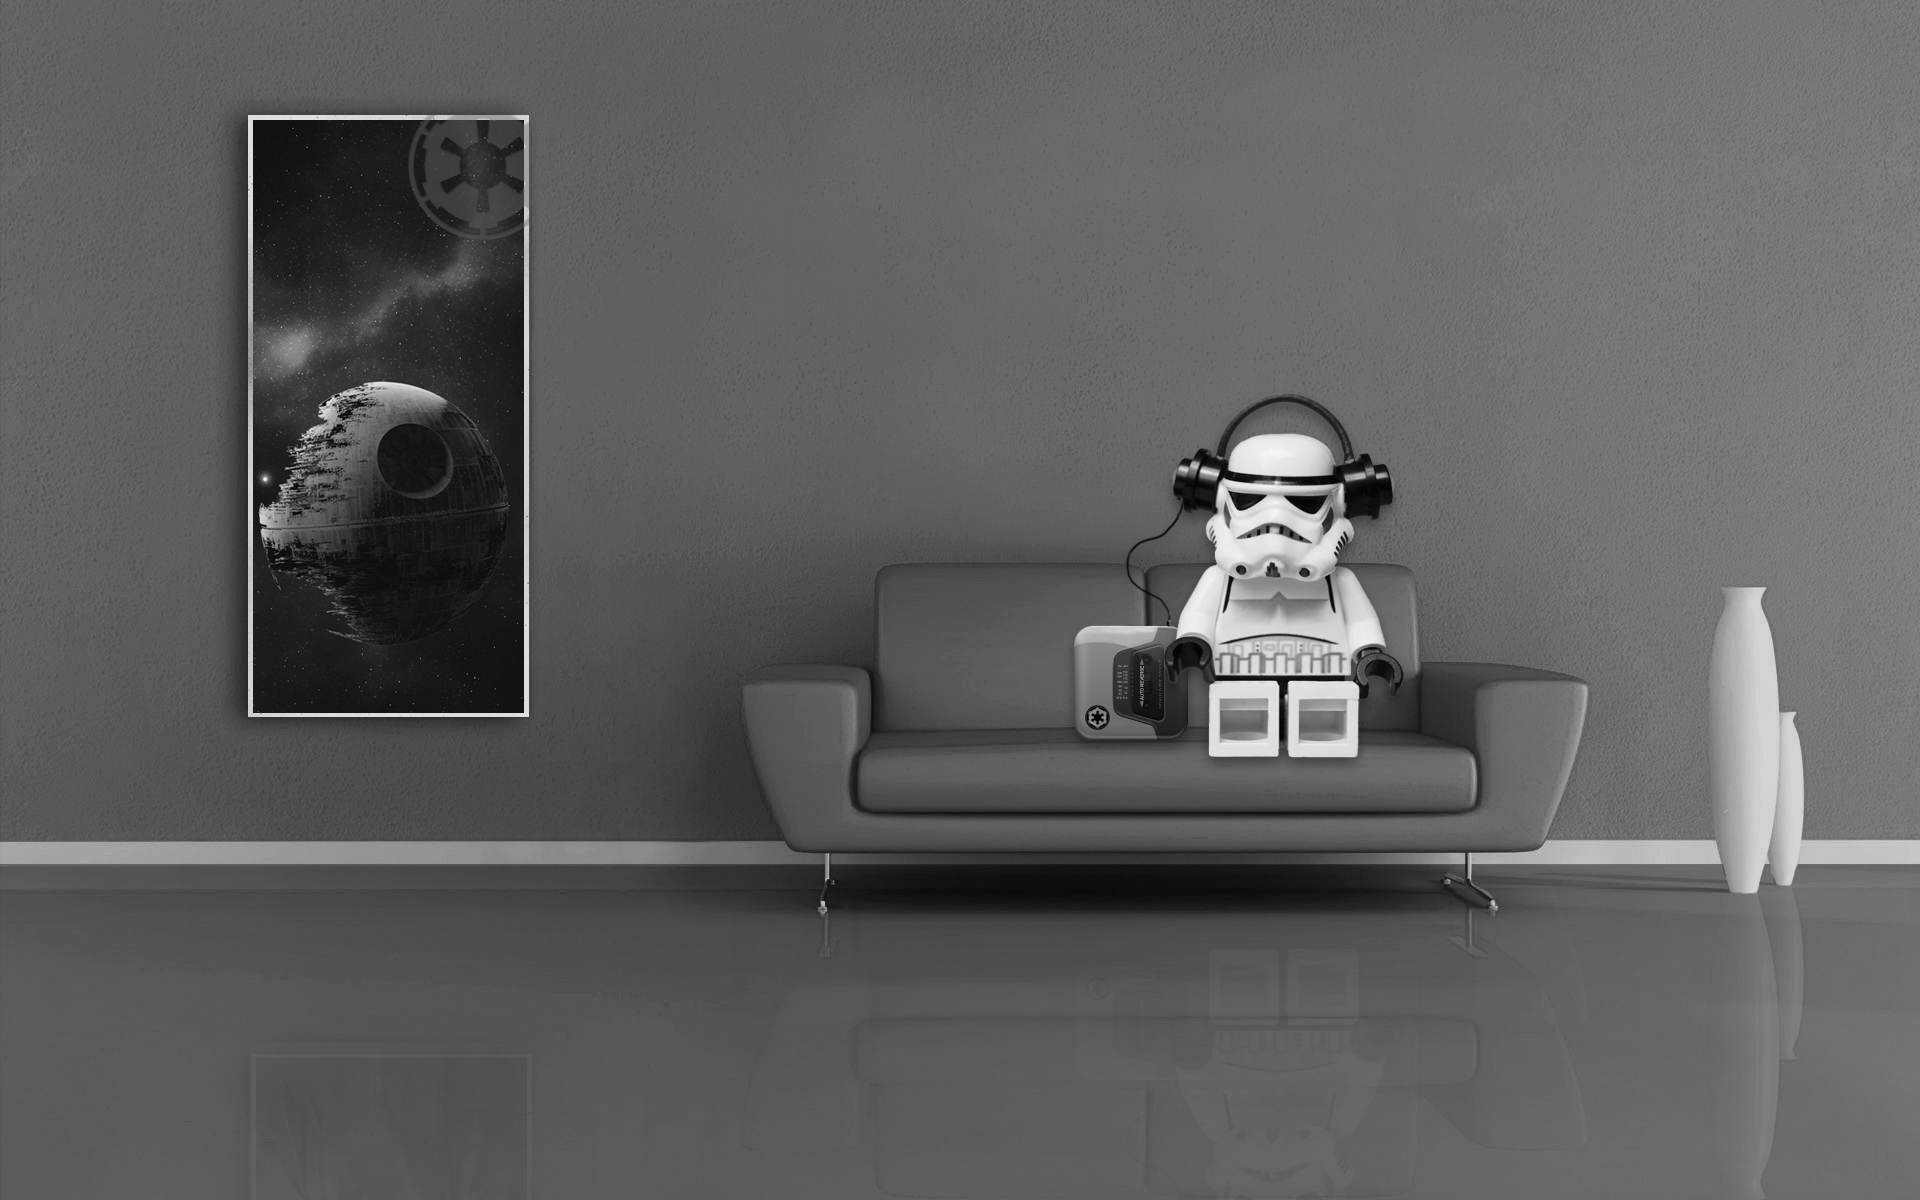 General 1920x1200 Star Wars LEGO Star Wars stormtrooper couch headphones music living rooms Death Star reflection toys digital art render monochrome humor minimalism LEGO Stormtrooper gray LEGO sitting Imperial Stormtrooper